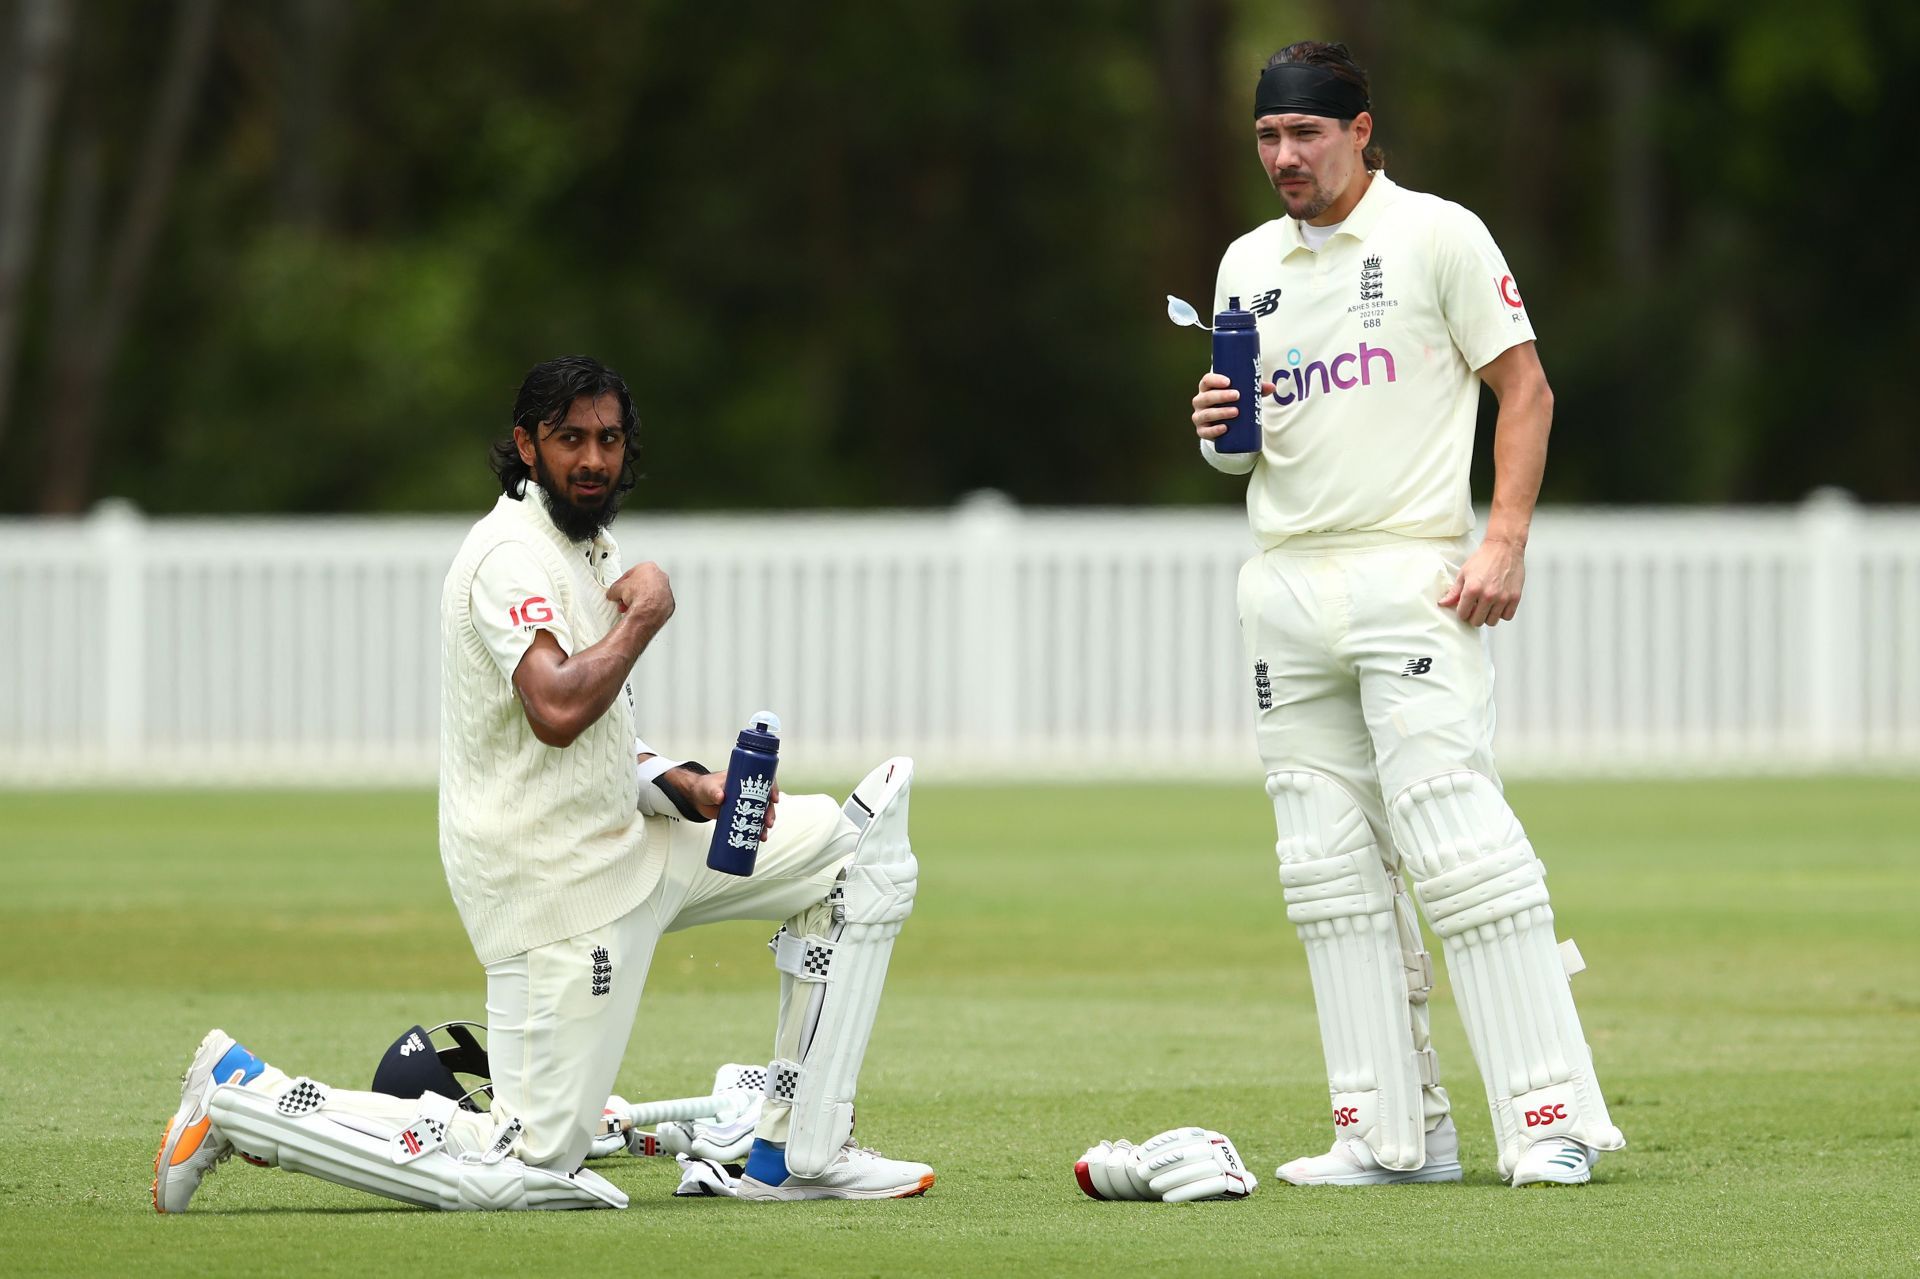 Haseeb Hammed and Rory Burns (Image Credits: Getty)